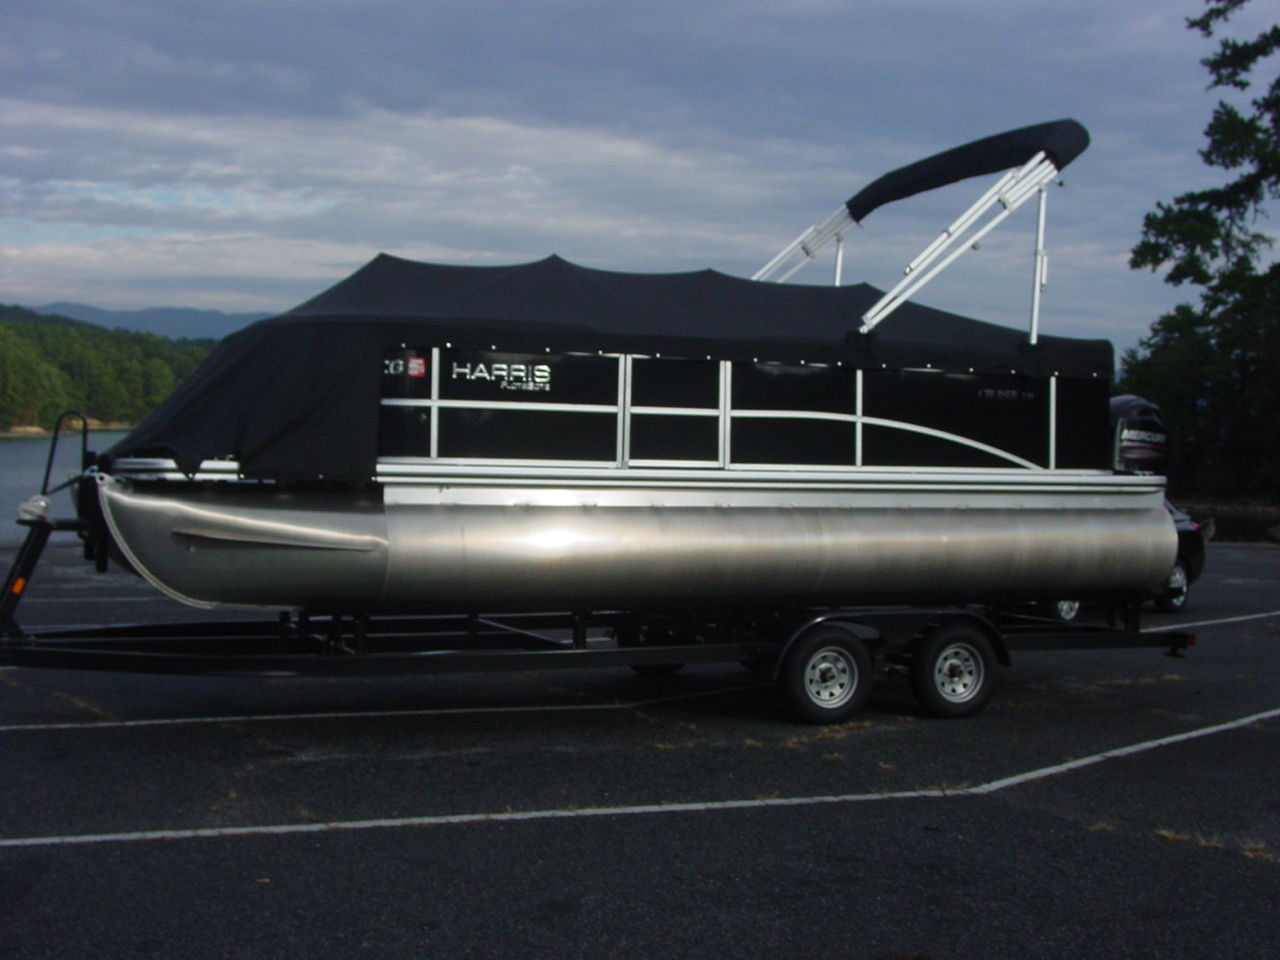 Harris Flotebote Cruiser 220 2013 for sale for $16,500 